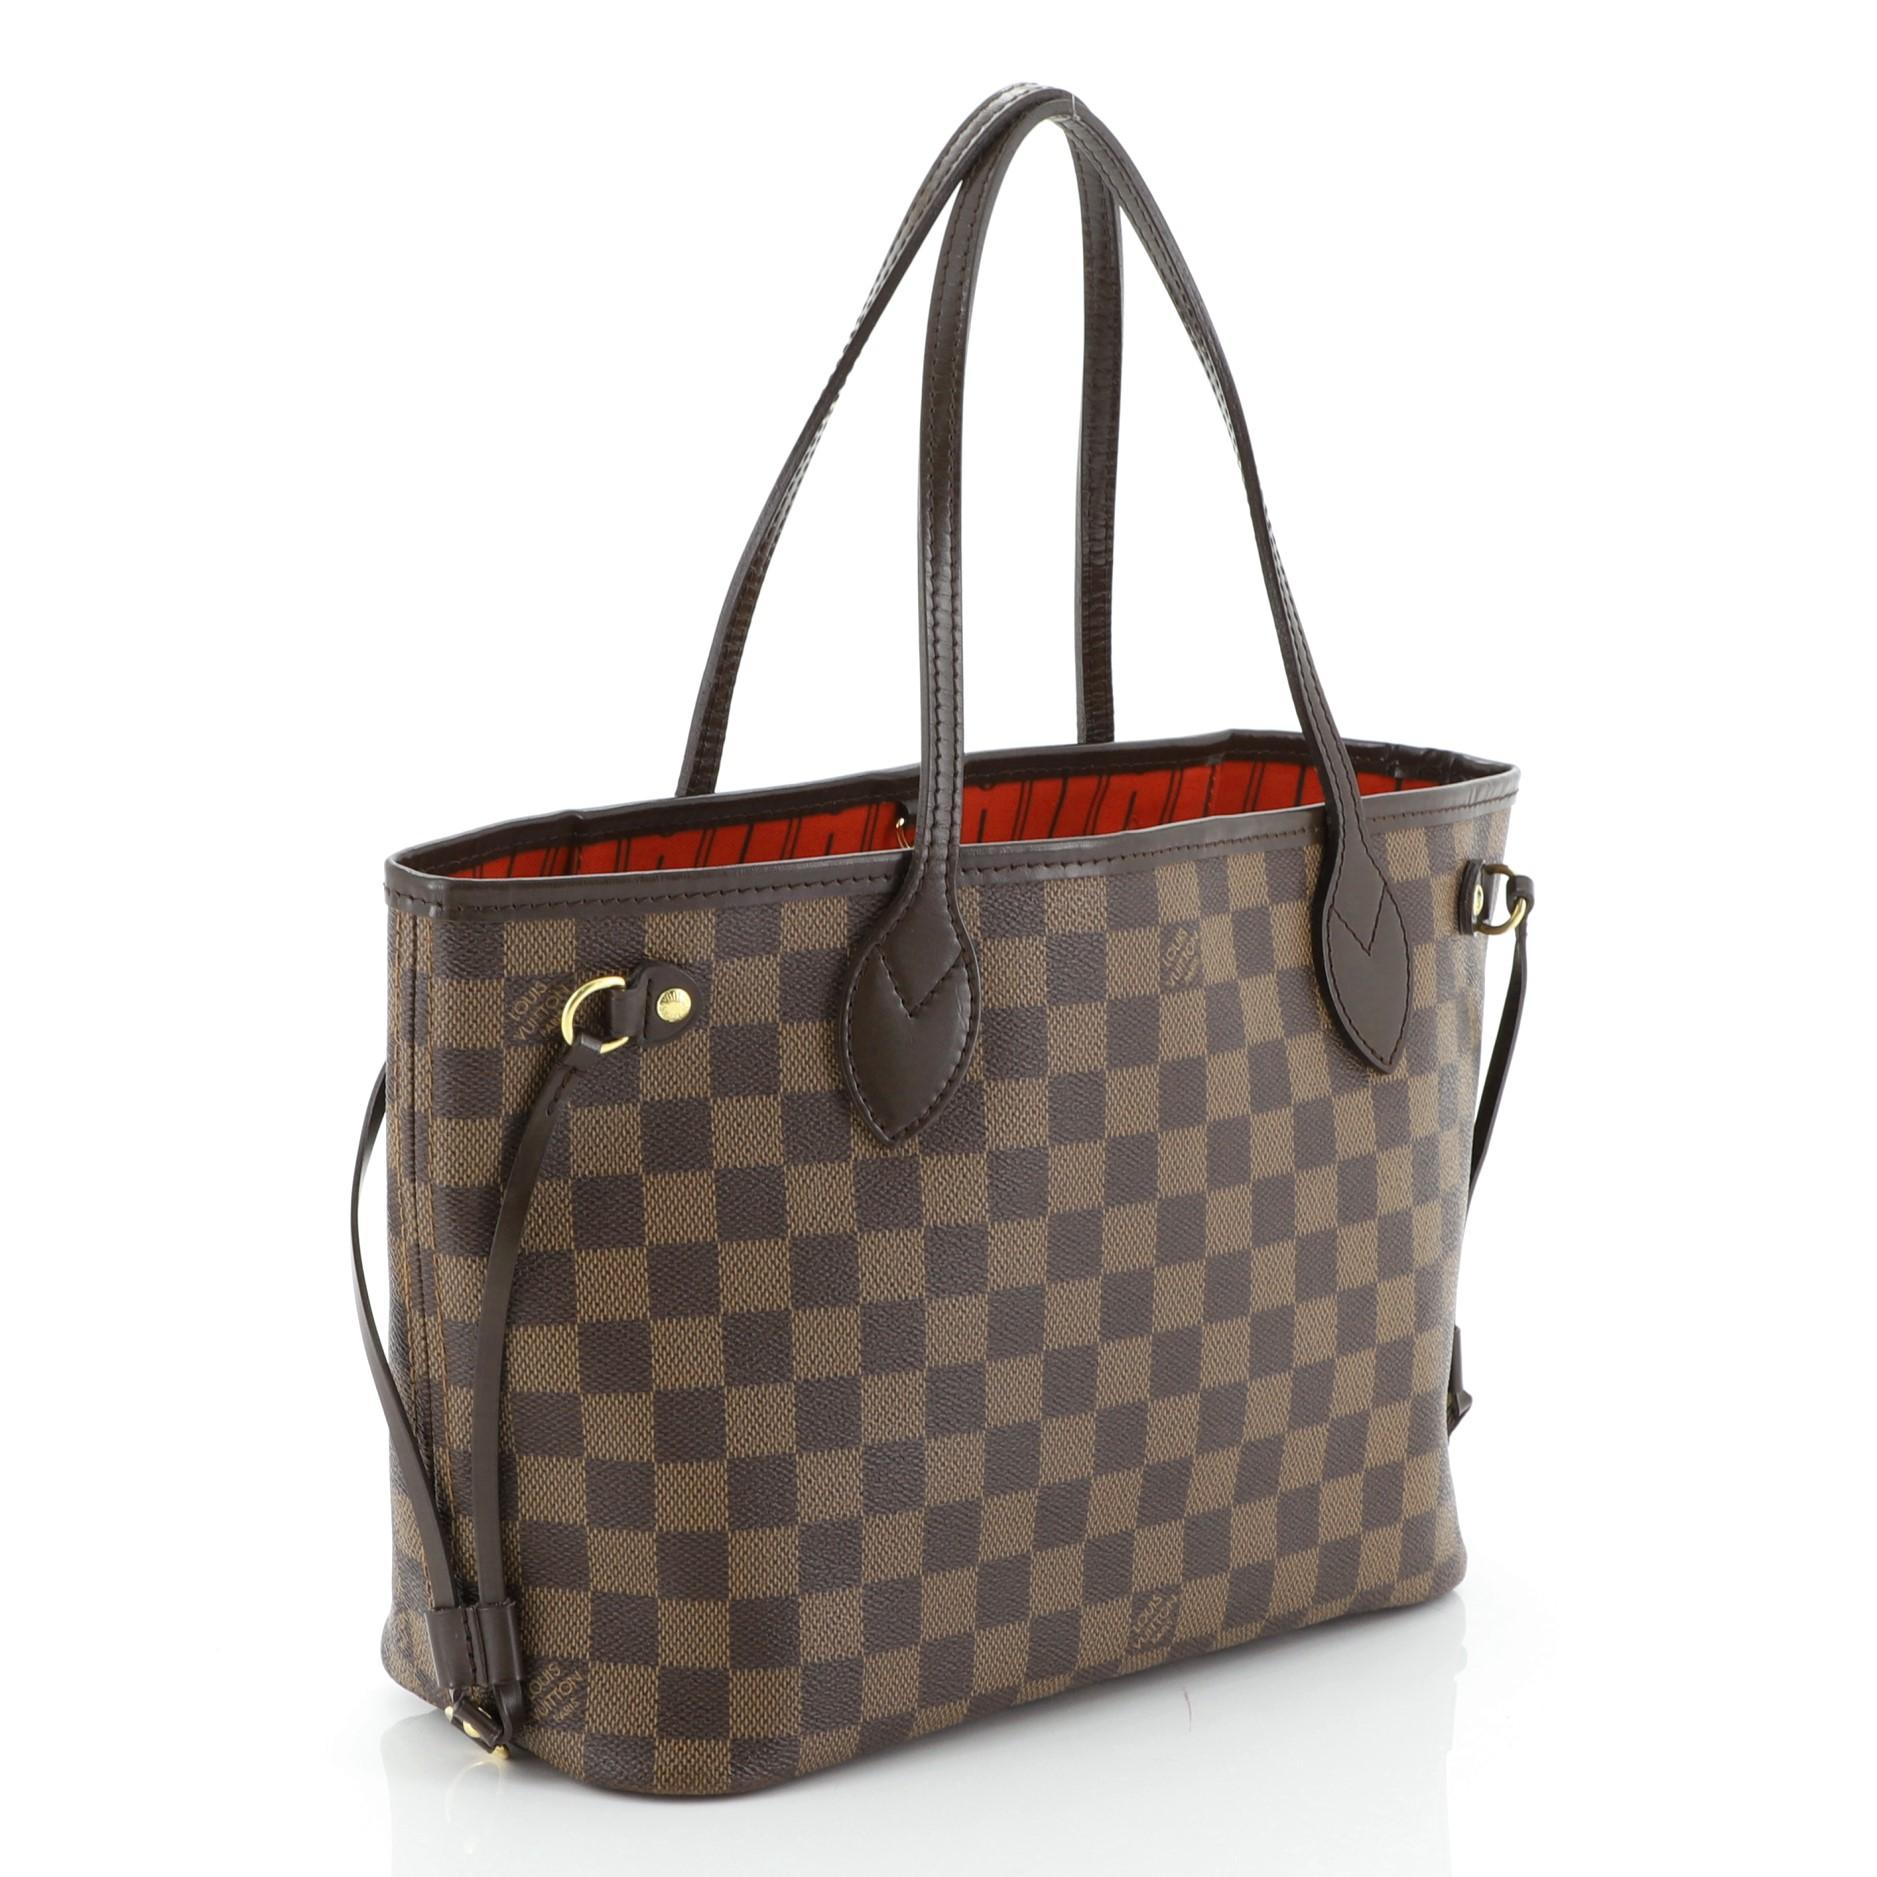 This Louis Vuitton Neverfull Tote Damier PM, crafted in damier ebene coated canvas, features dual slim handles, side laces, and gold-tone hardware. Its wide open top showcases a red fabric interior with side zip pocket. Authenticity code reads: